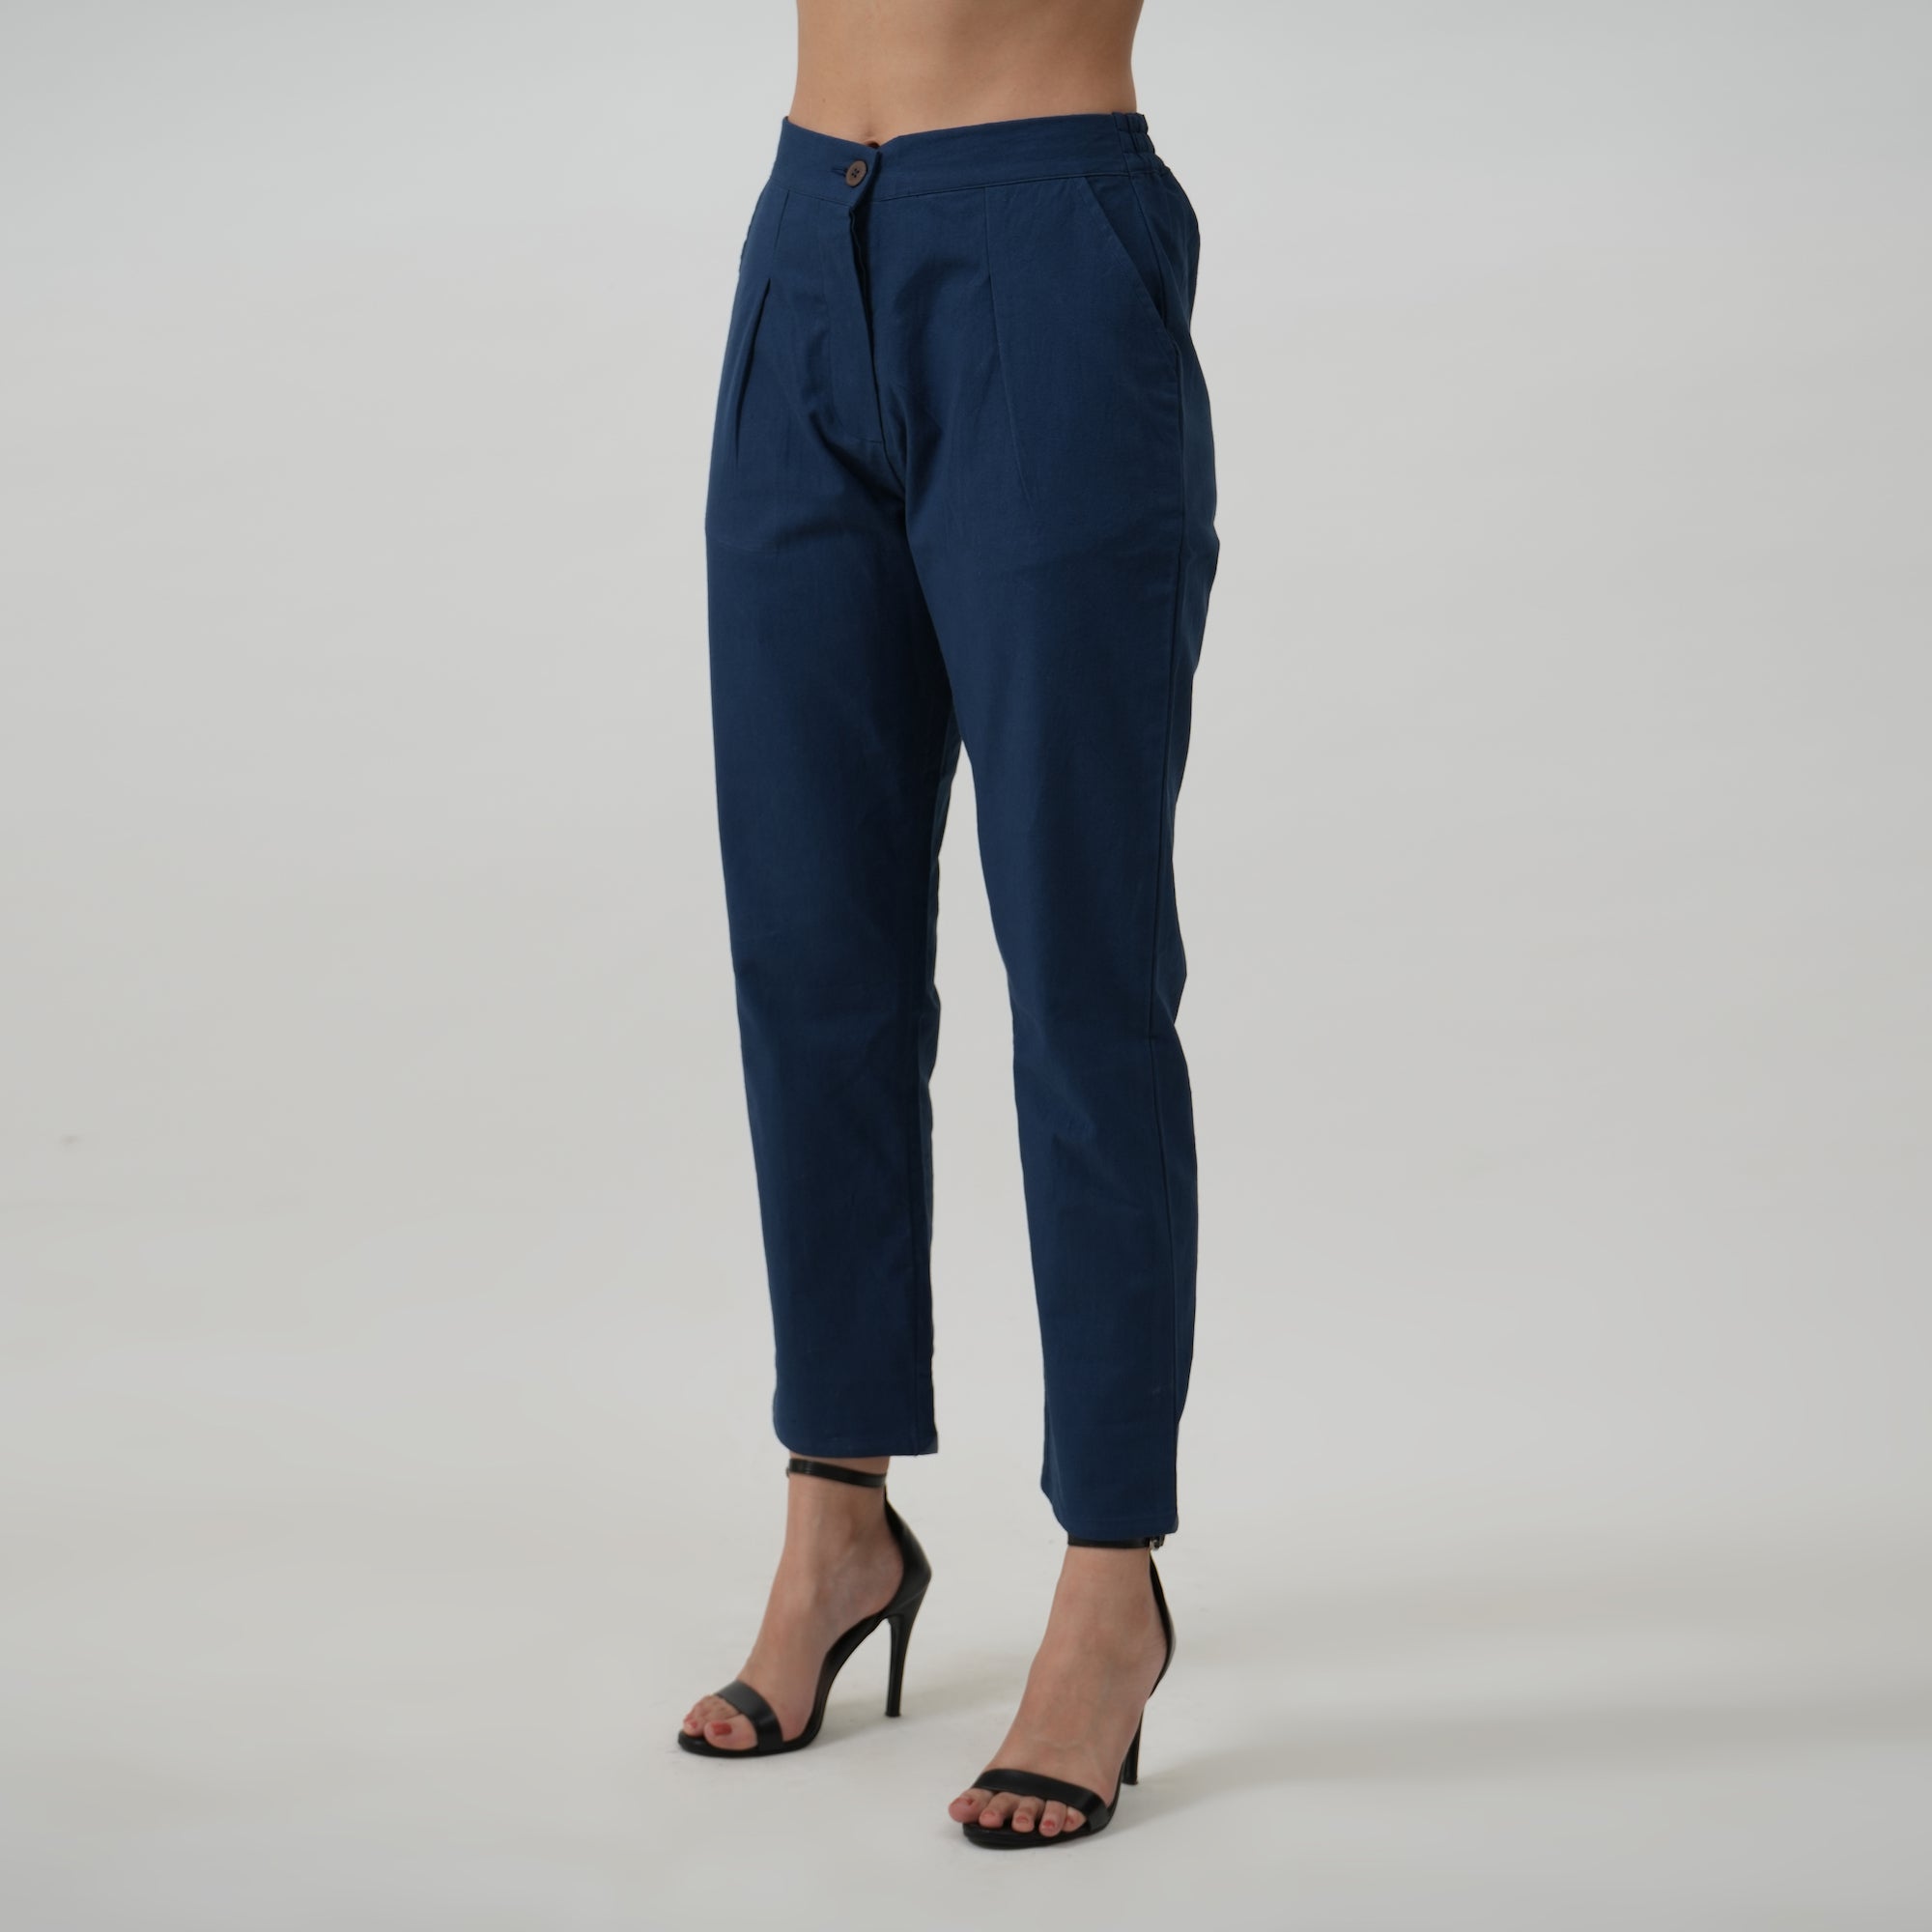 Tapered Pants - Navy Blue